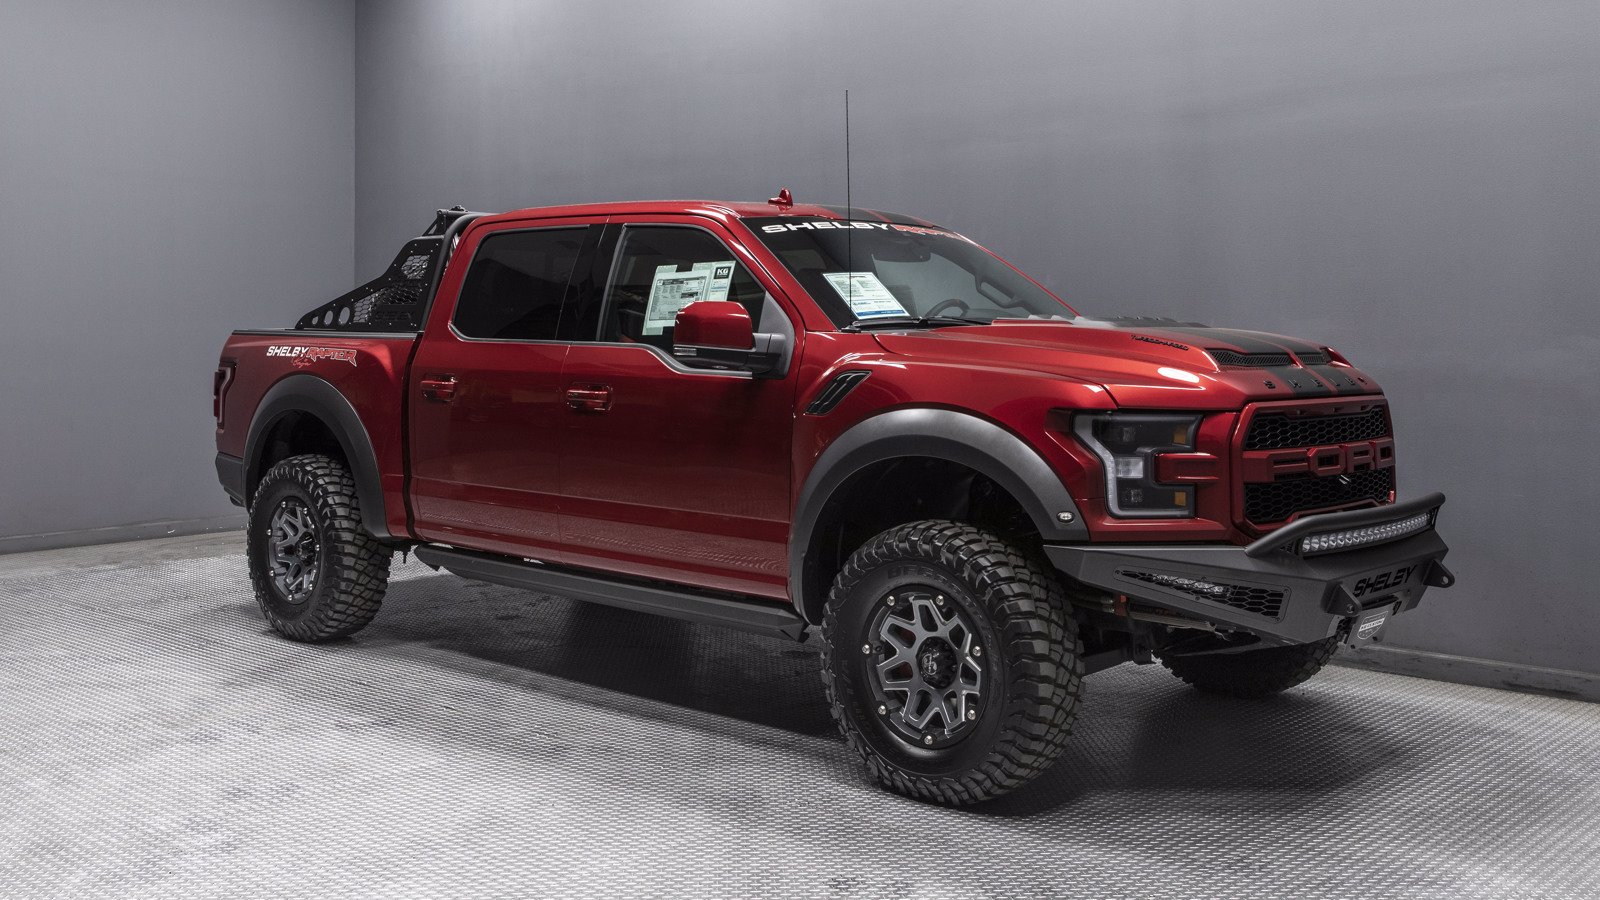 New 2020 Ford F-150 Raptor Shelby Crew Cab Pickup in Redlands #07226